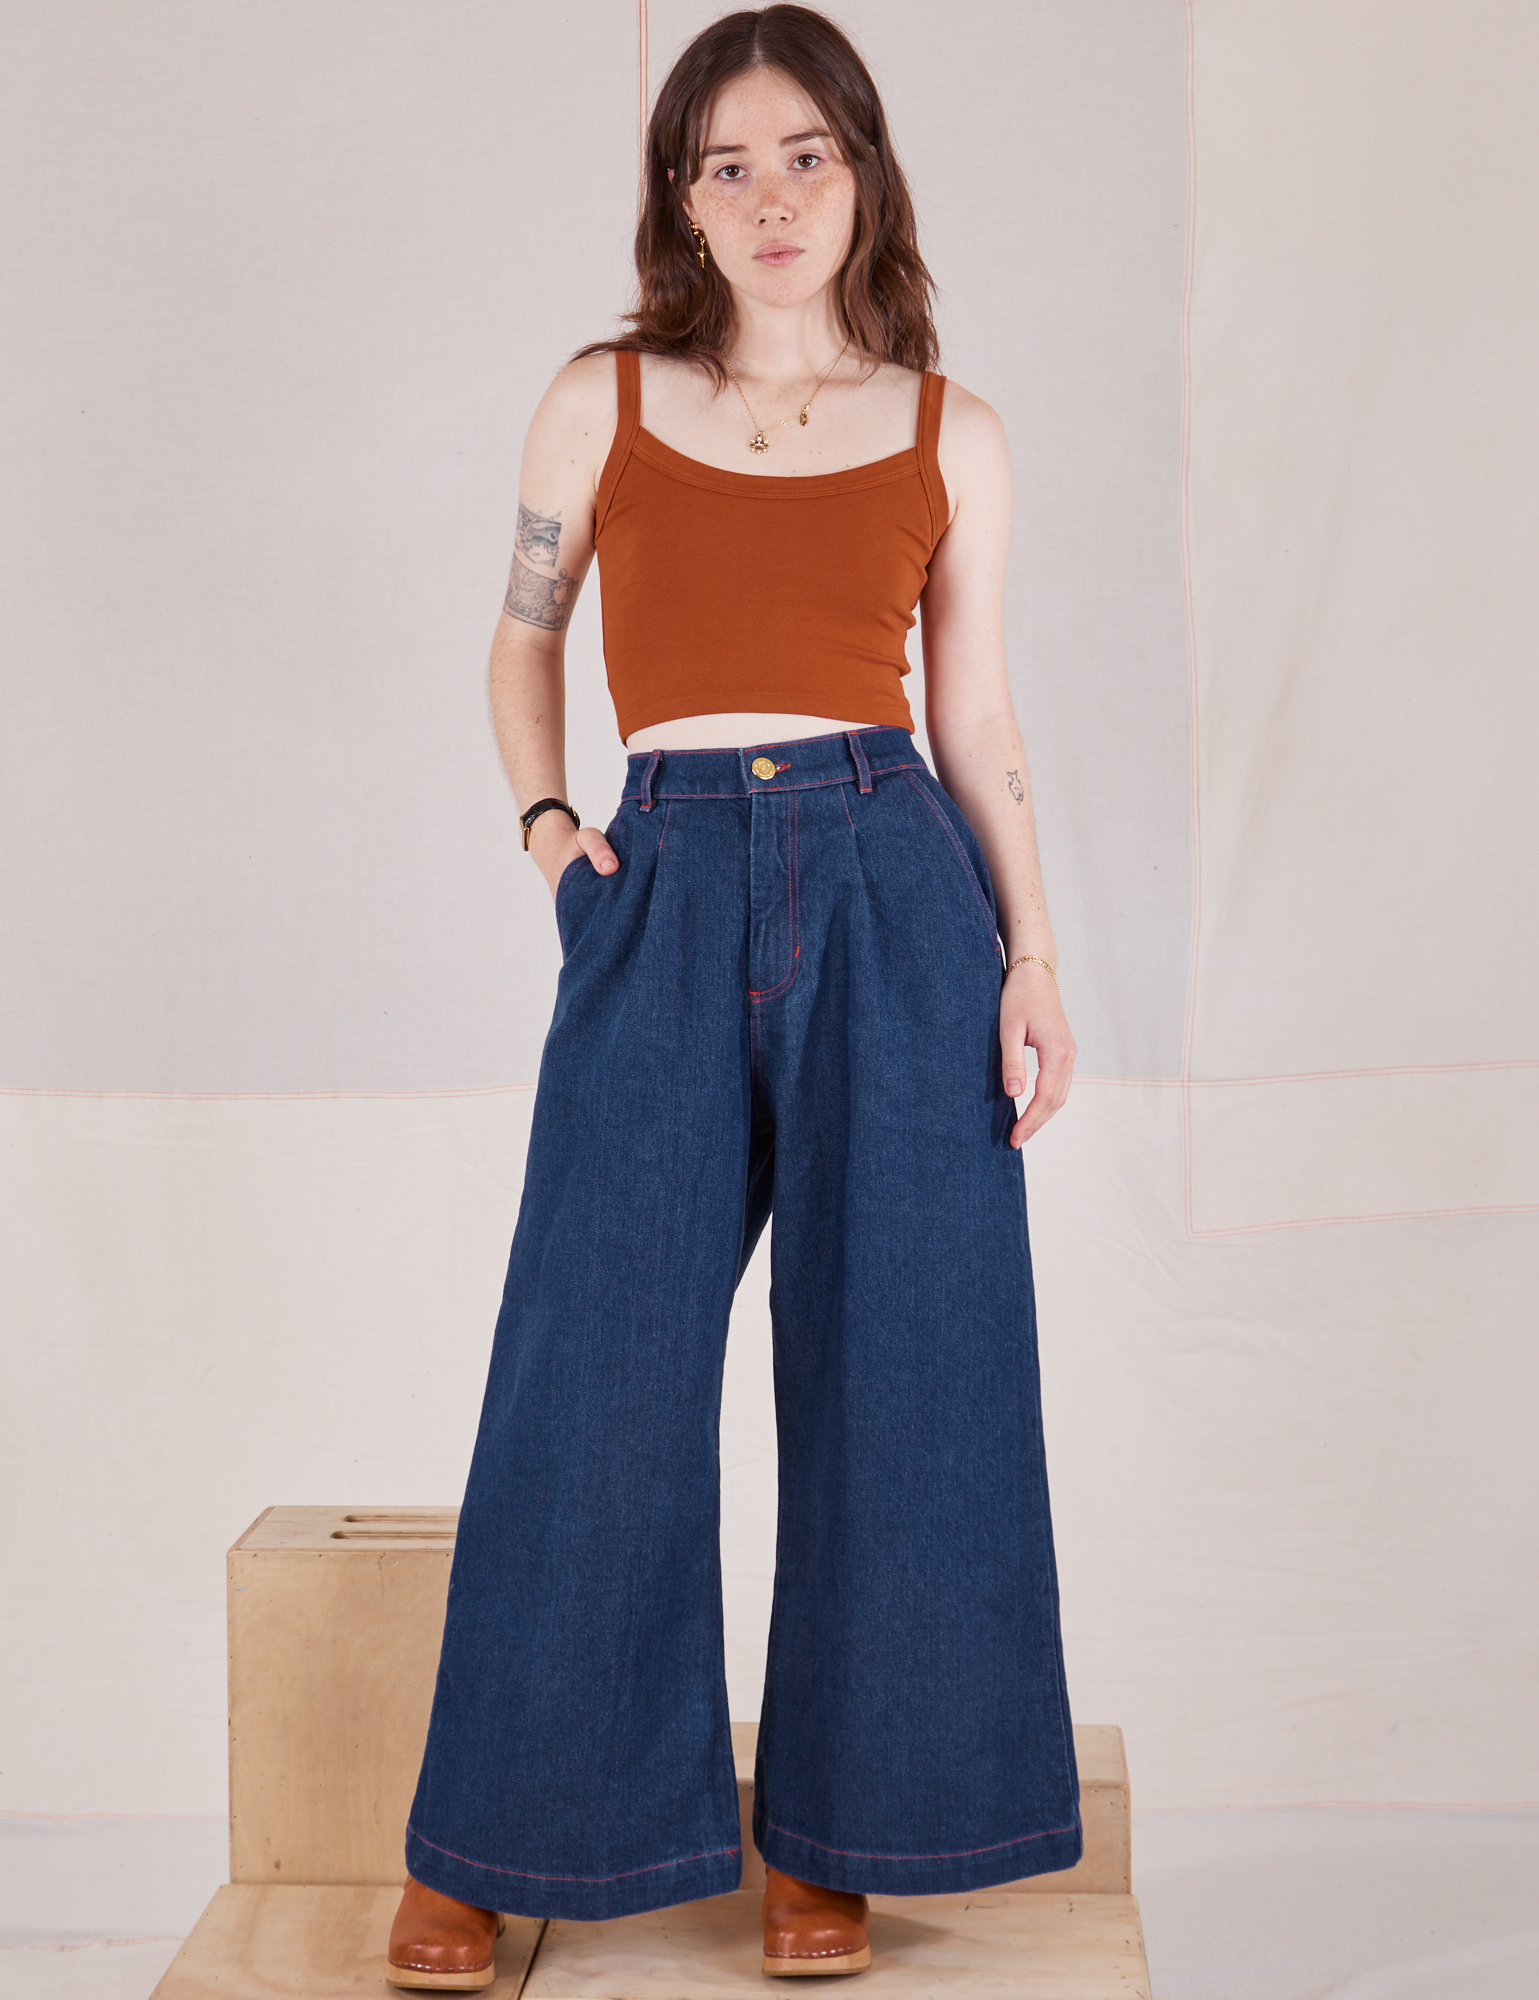 Hana is 5&#39;3&quot; and wearing P Petite Indigo Wide Leg Trousers in Dark Wash and burnt terracotta Cami